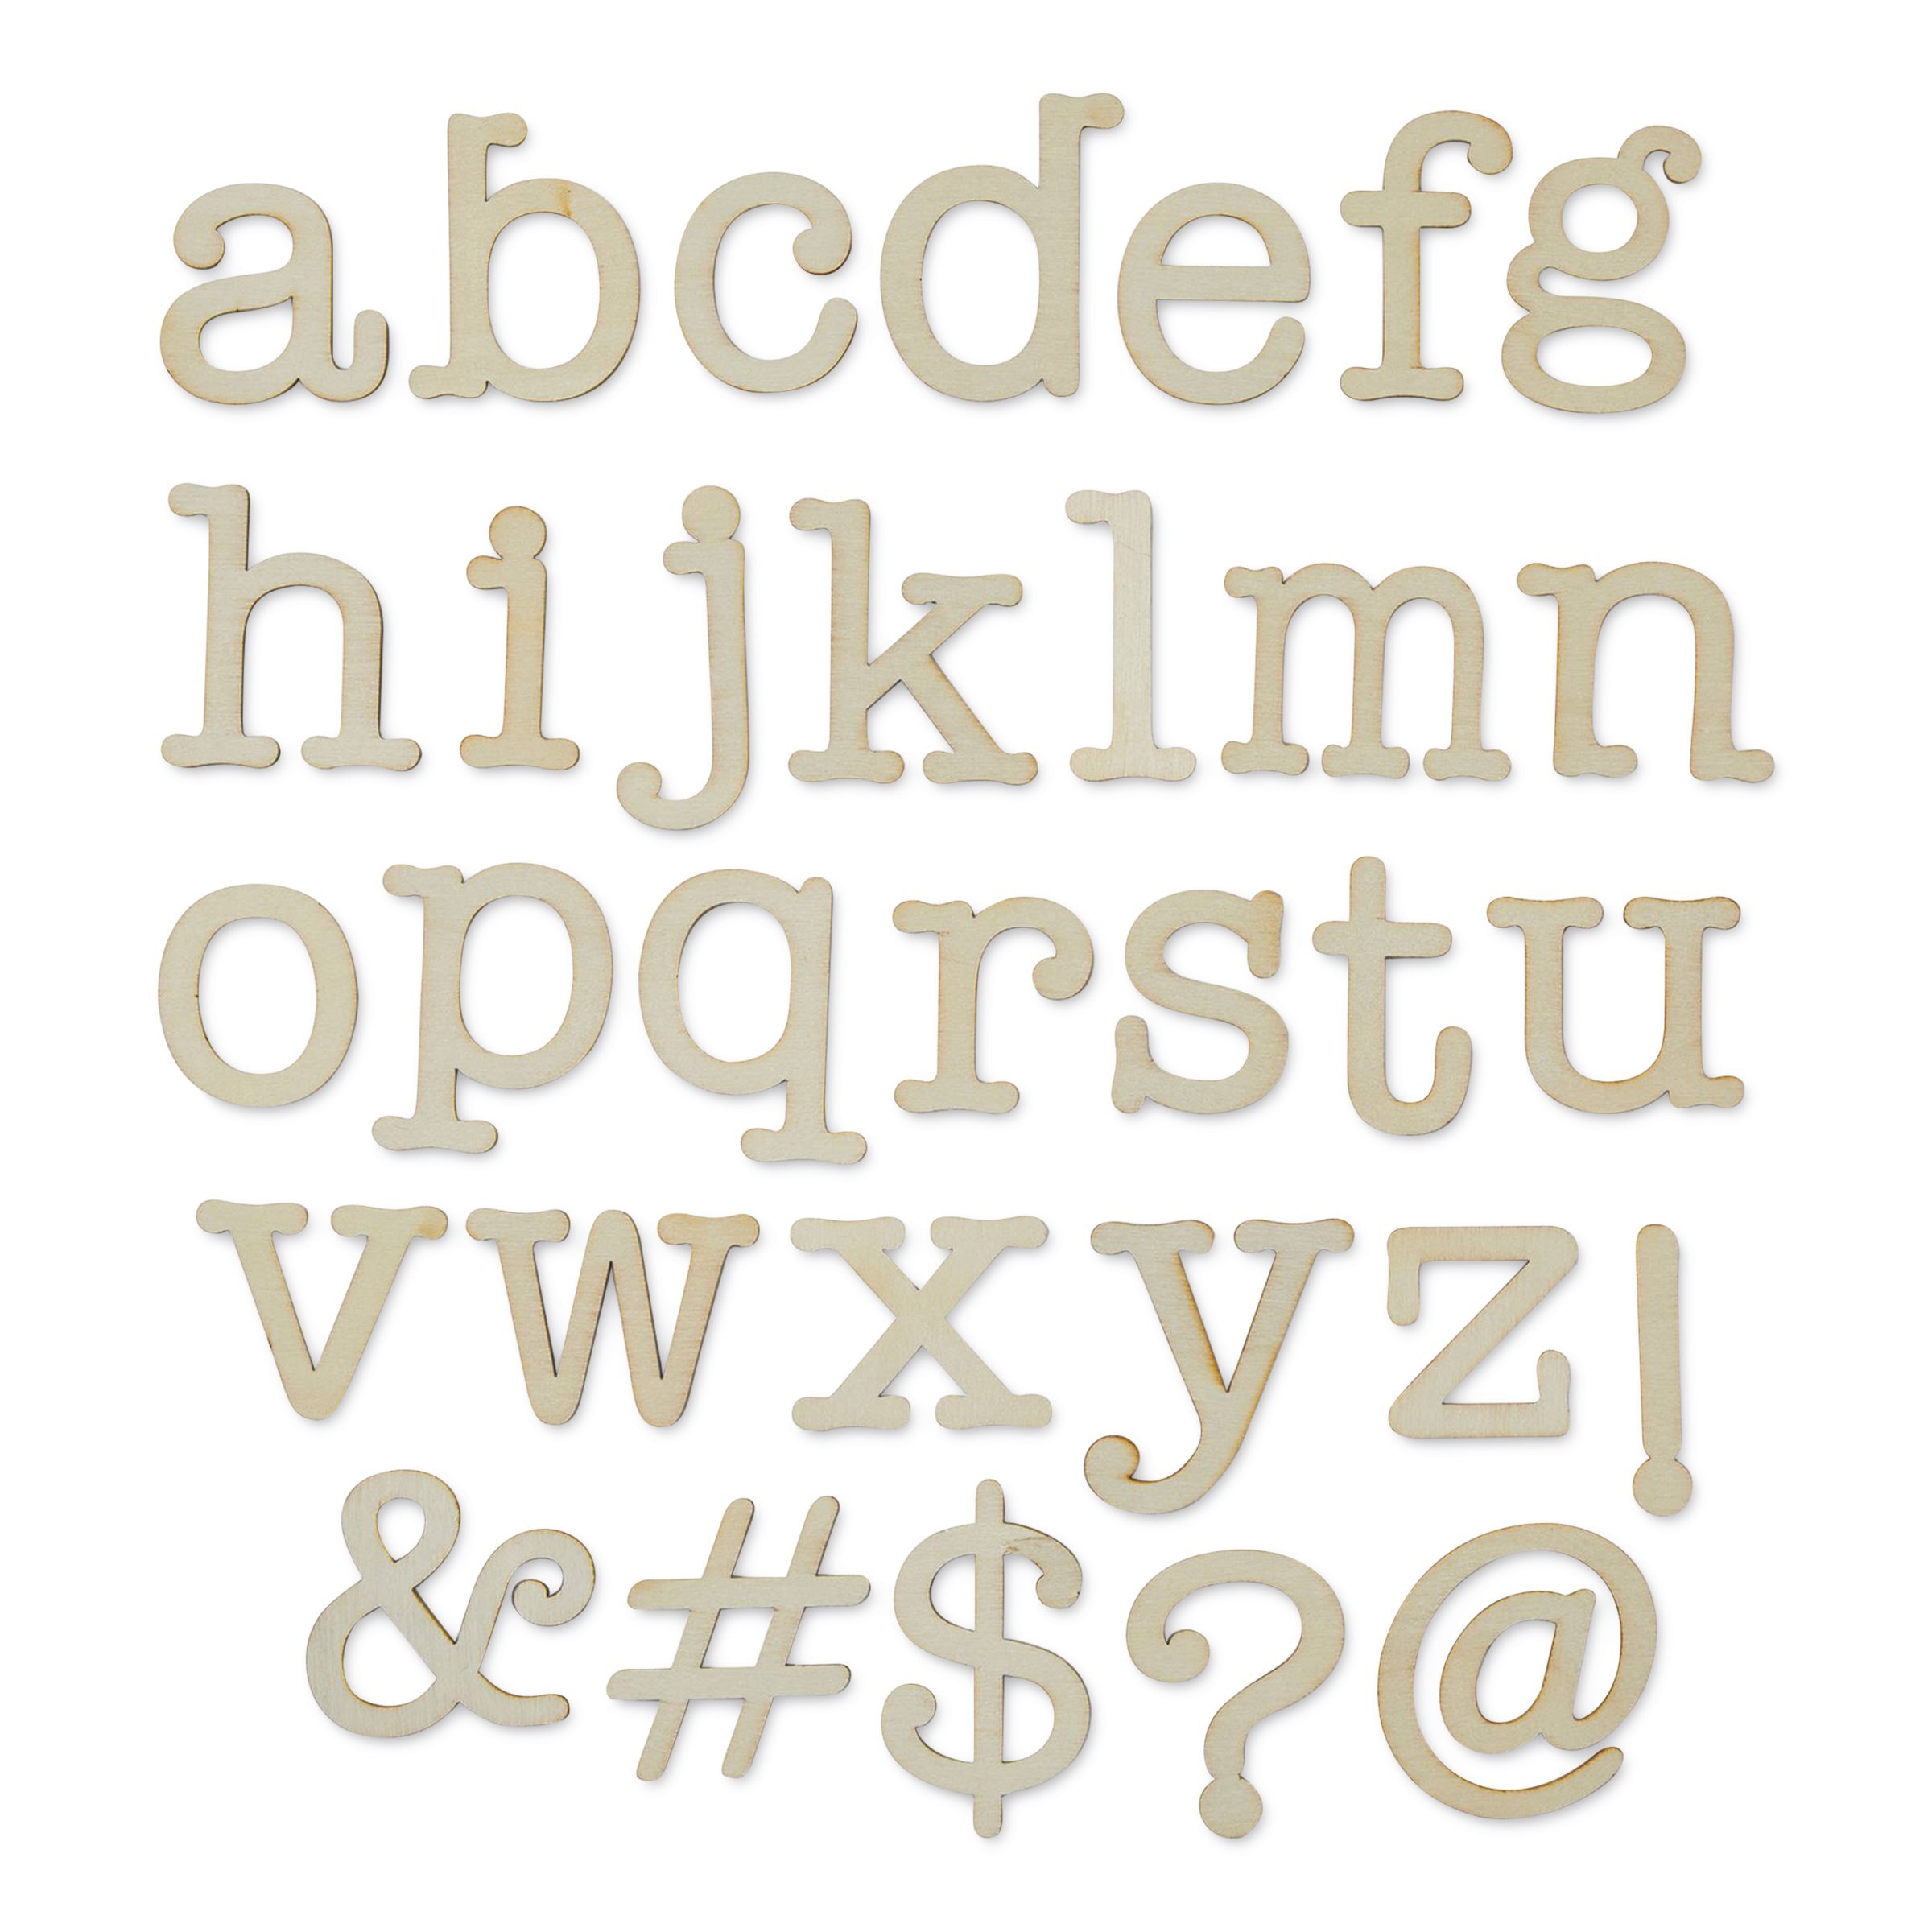 2 Lowercase Classic Serif Letters 26ct by Park Lane